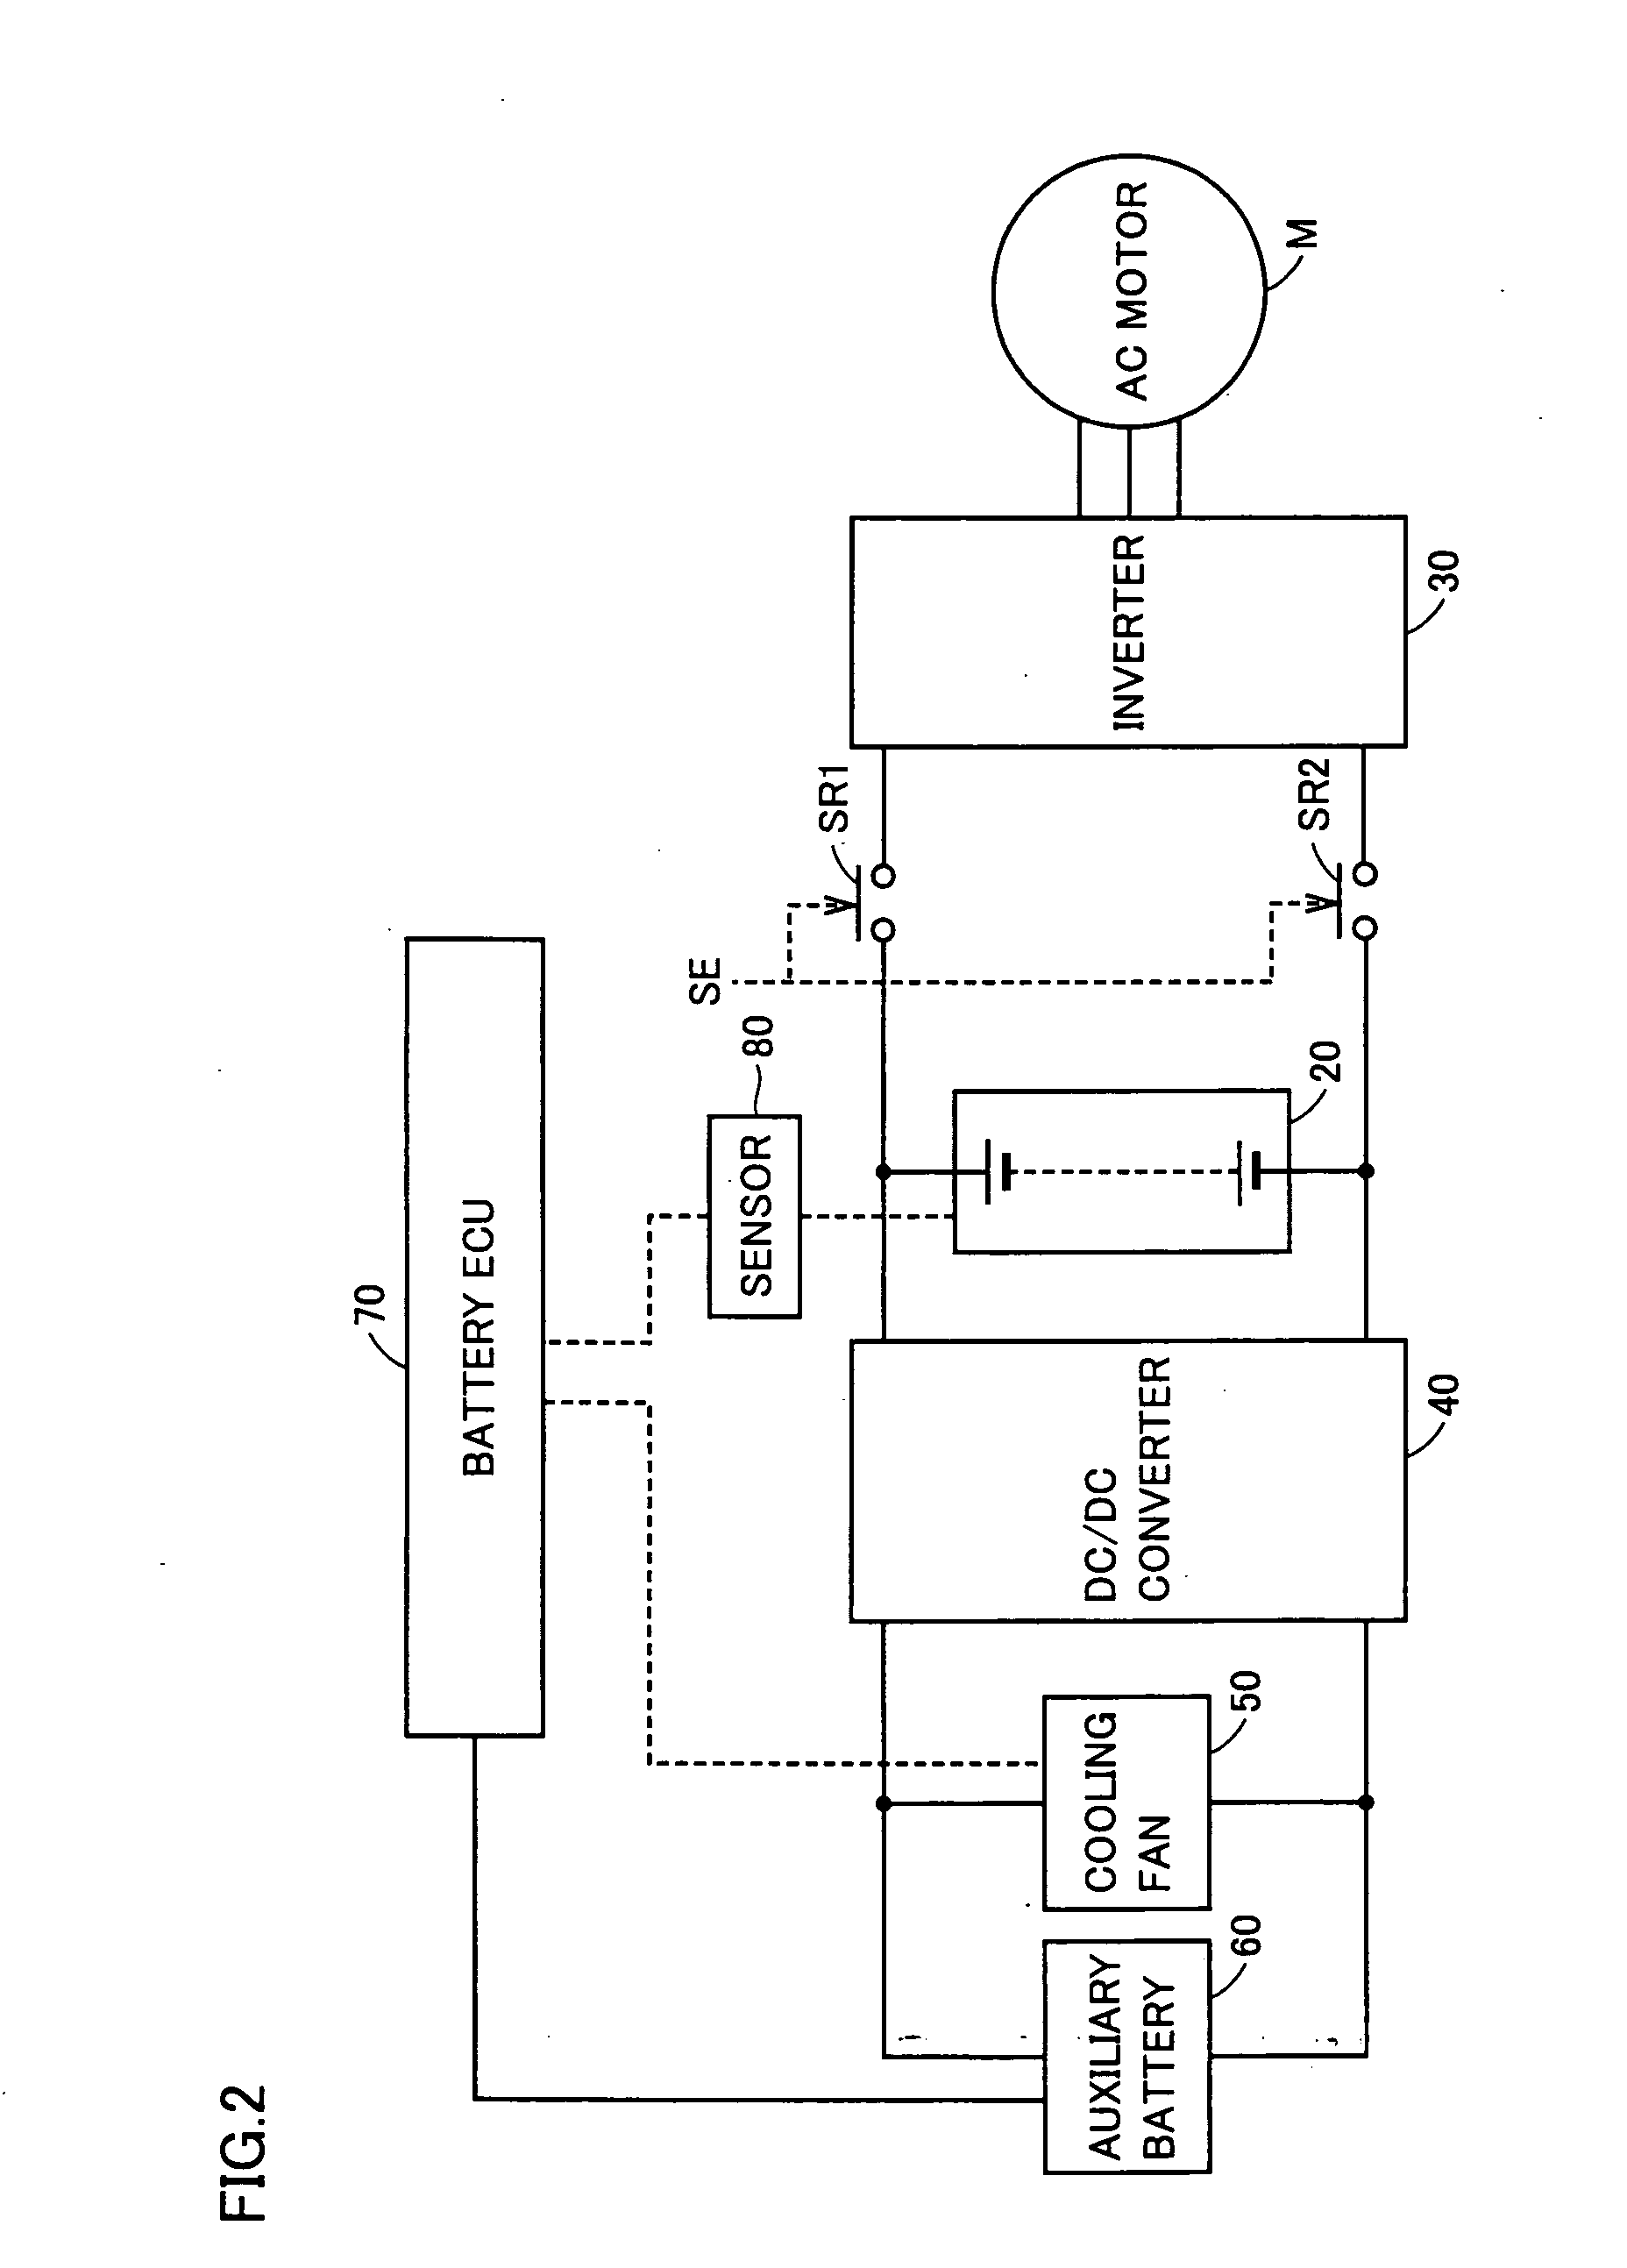 Power supply unit compactly accommodating components and having uniform battery characteristic